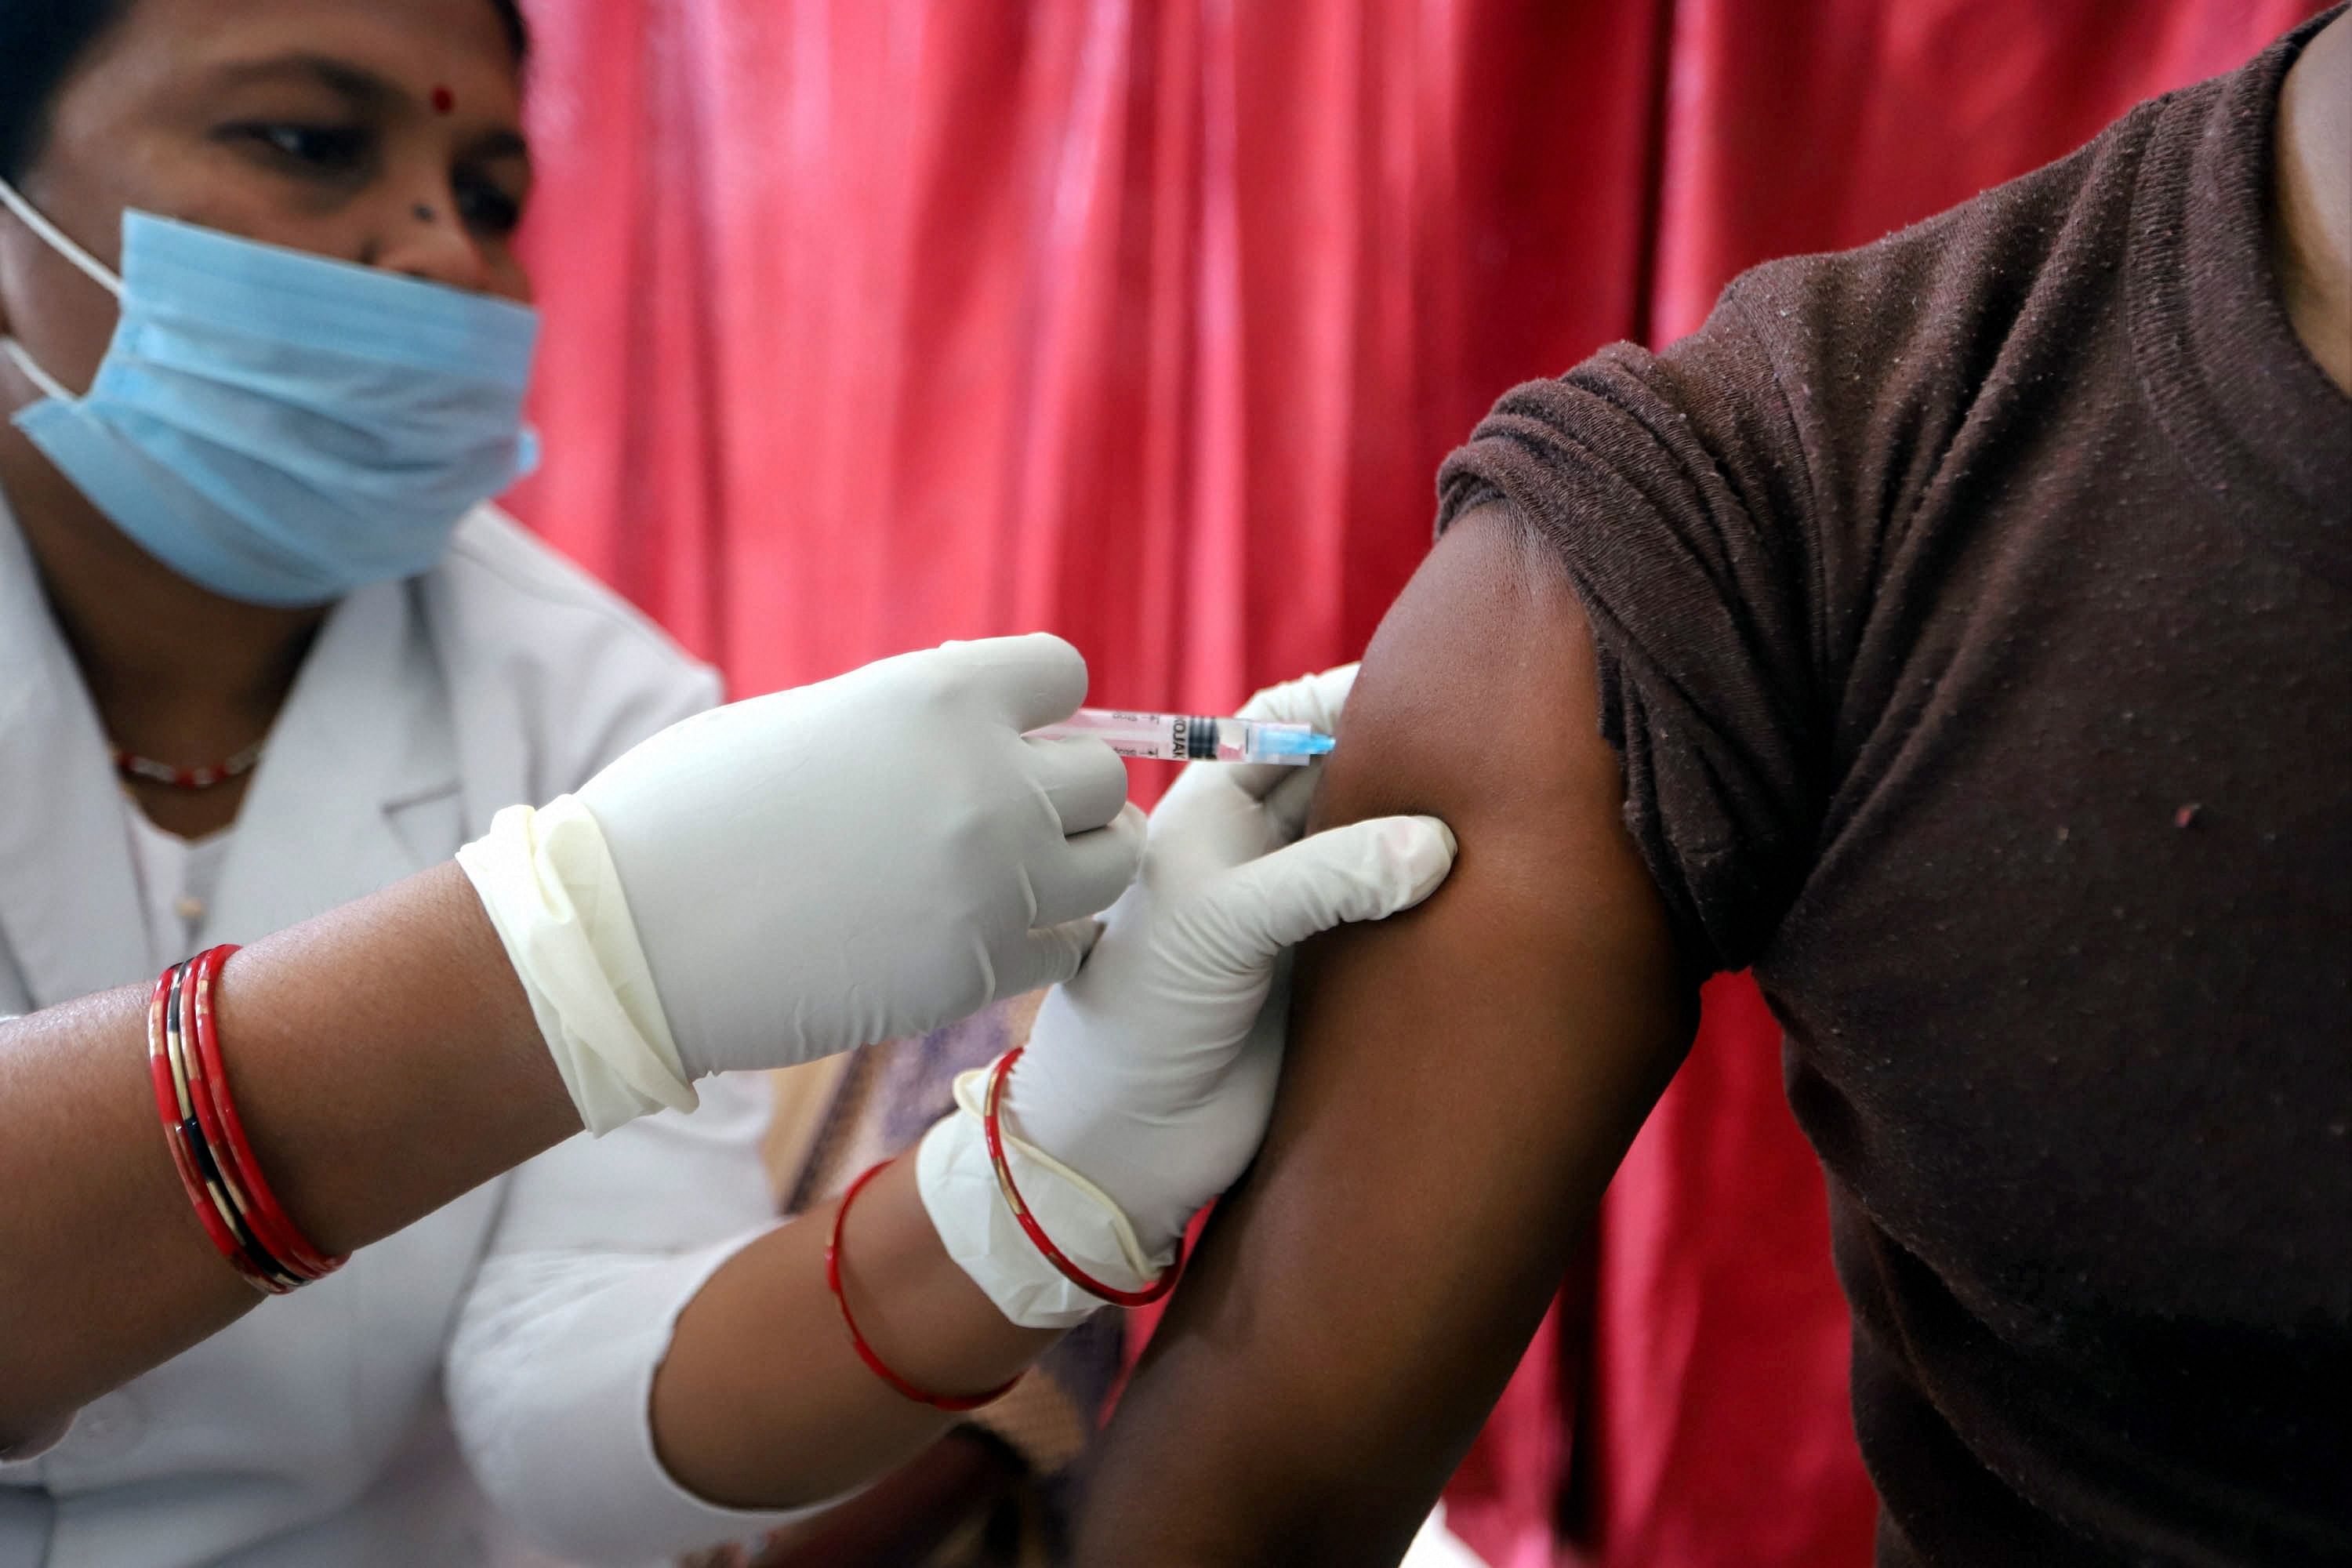 A medic administers second dose of Covishield vaccine during a COVID-19 inoculation drive, in Prayagraj, Friday, Feb. 19, 2021. Credit: PTI Photo